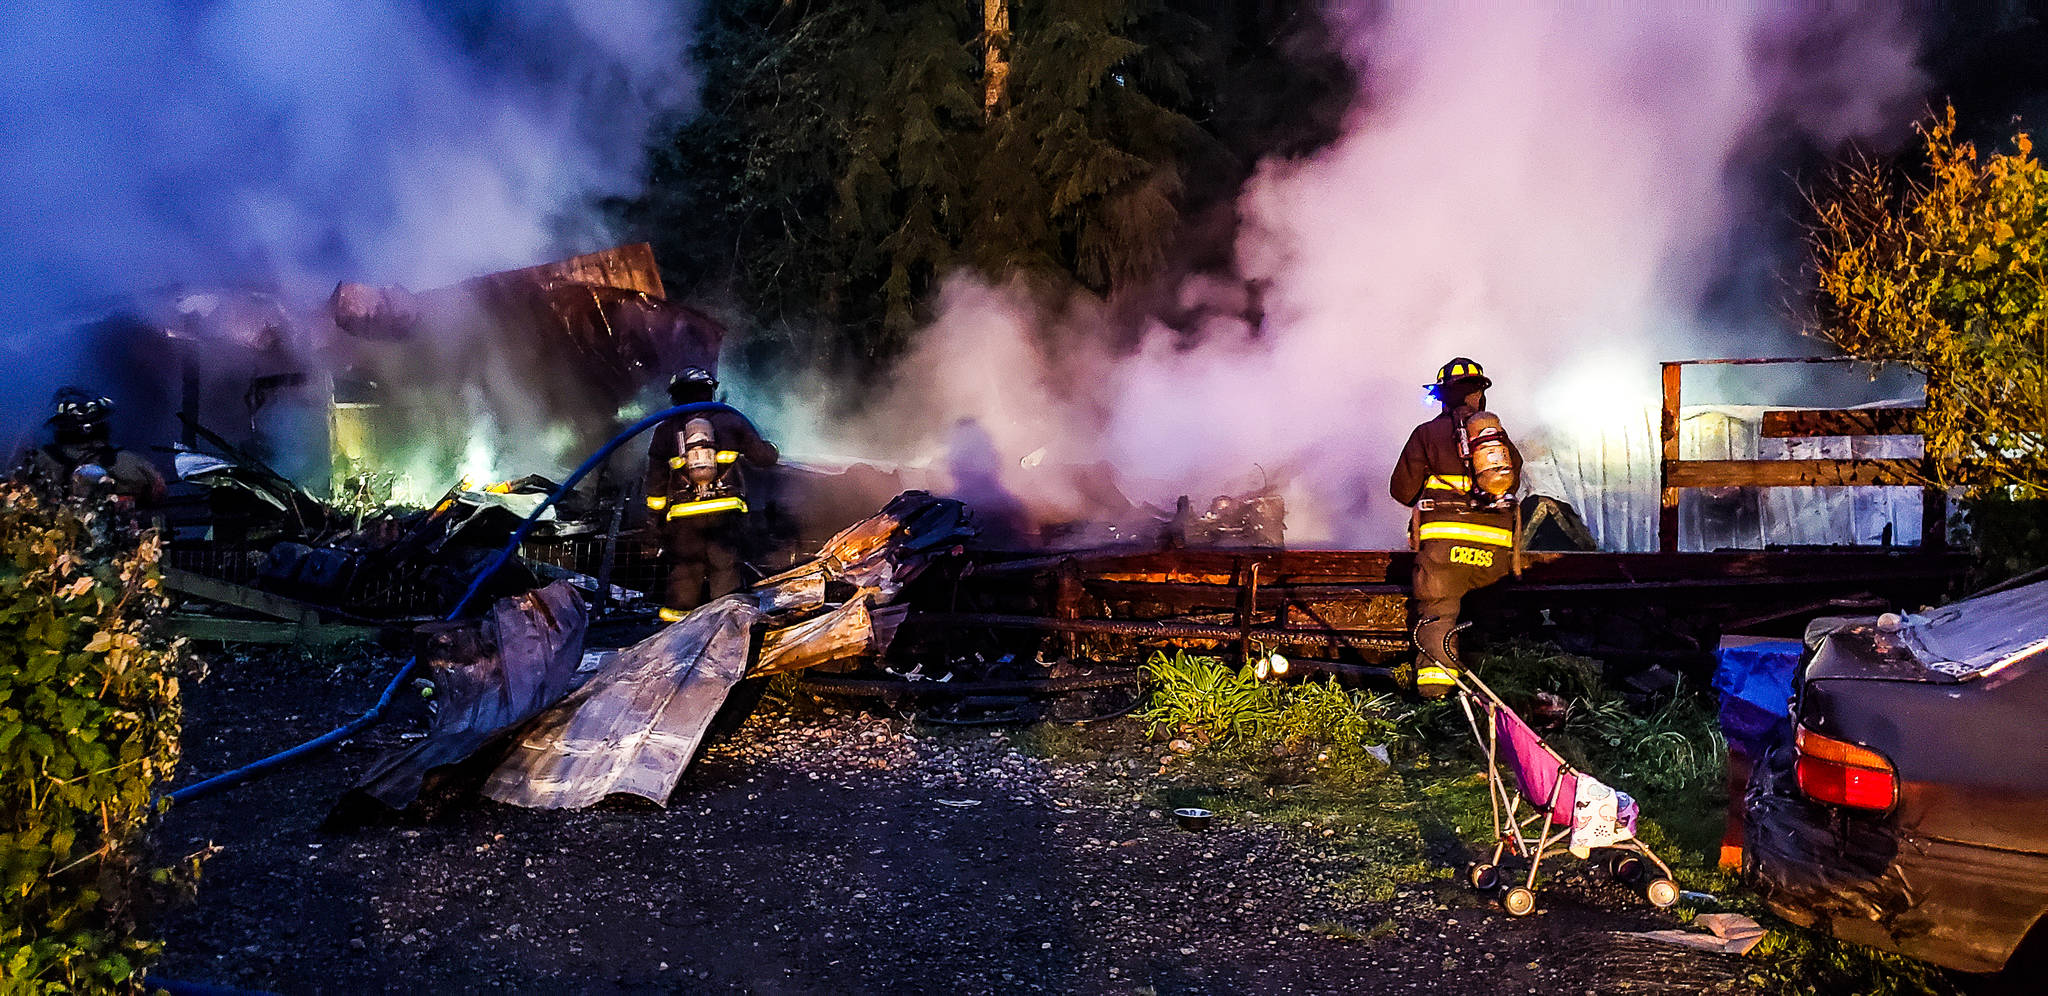 One fatality was reported at the scene of an overnight trailer fire in Satsop Wednesday morning.
(Photo provided by Fire District #5)